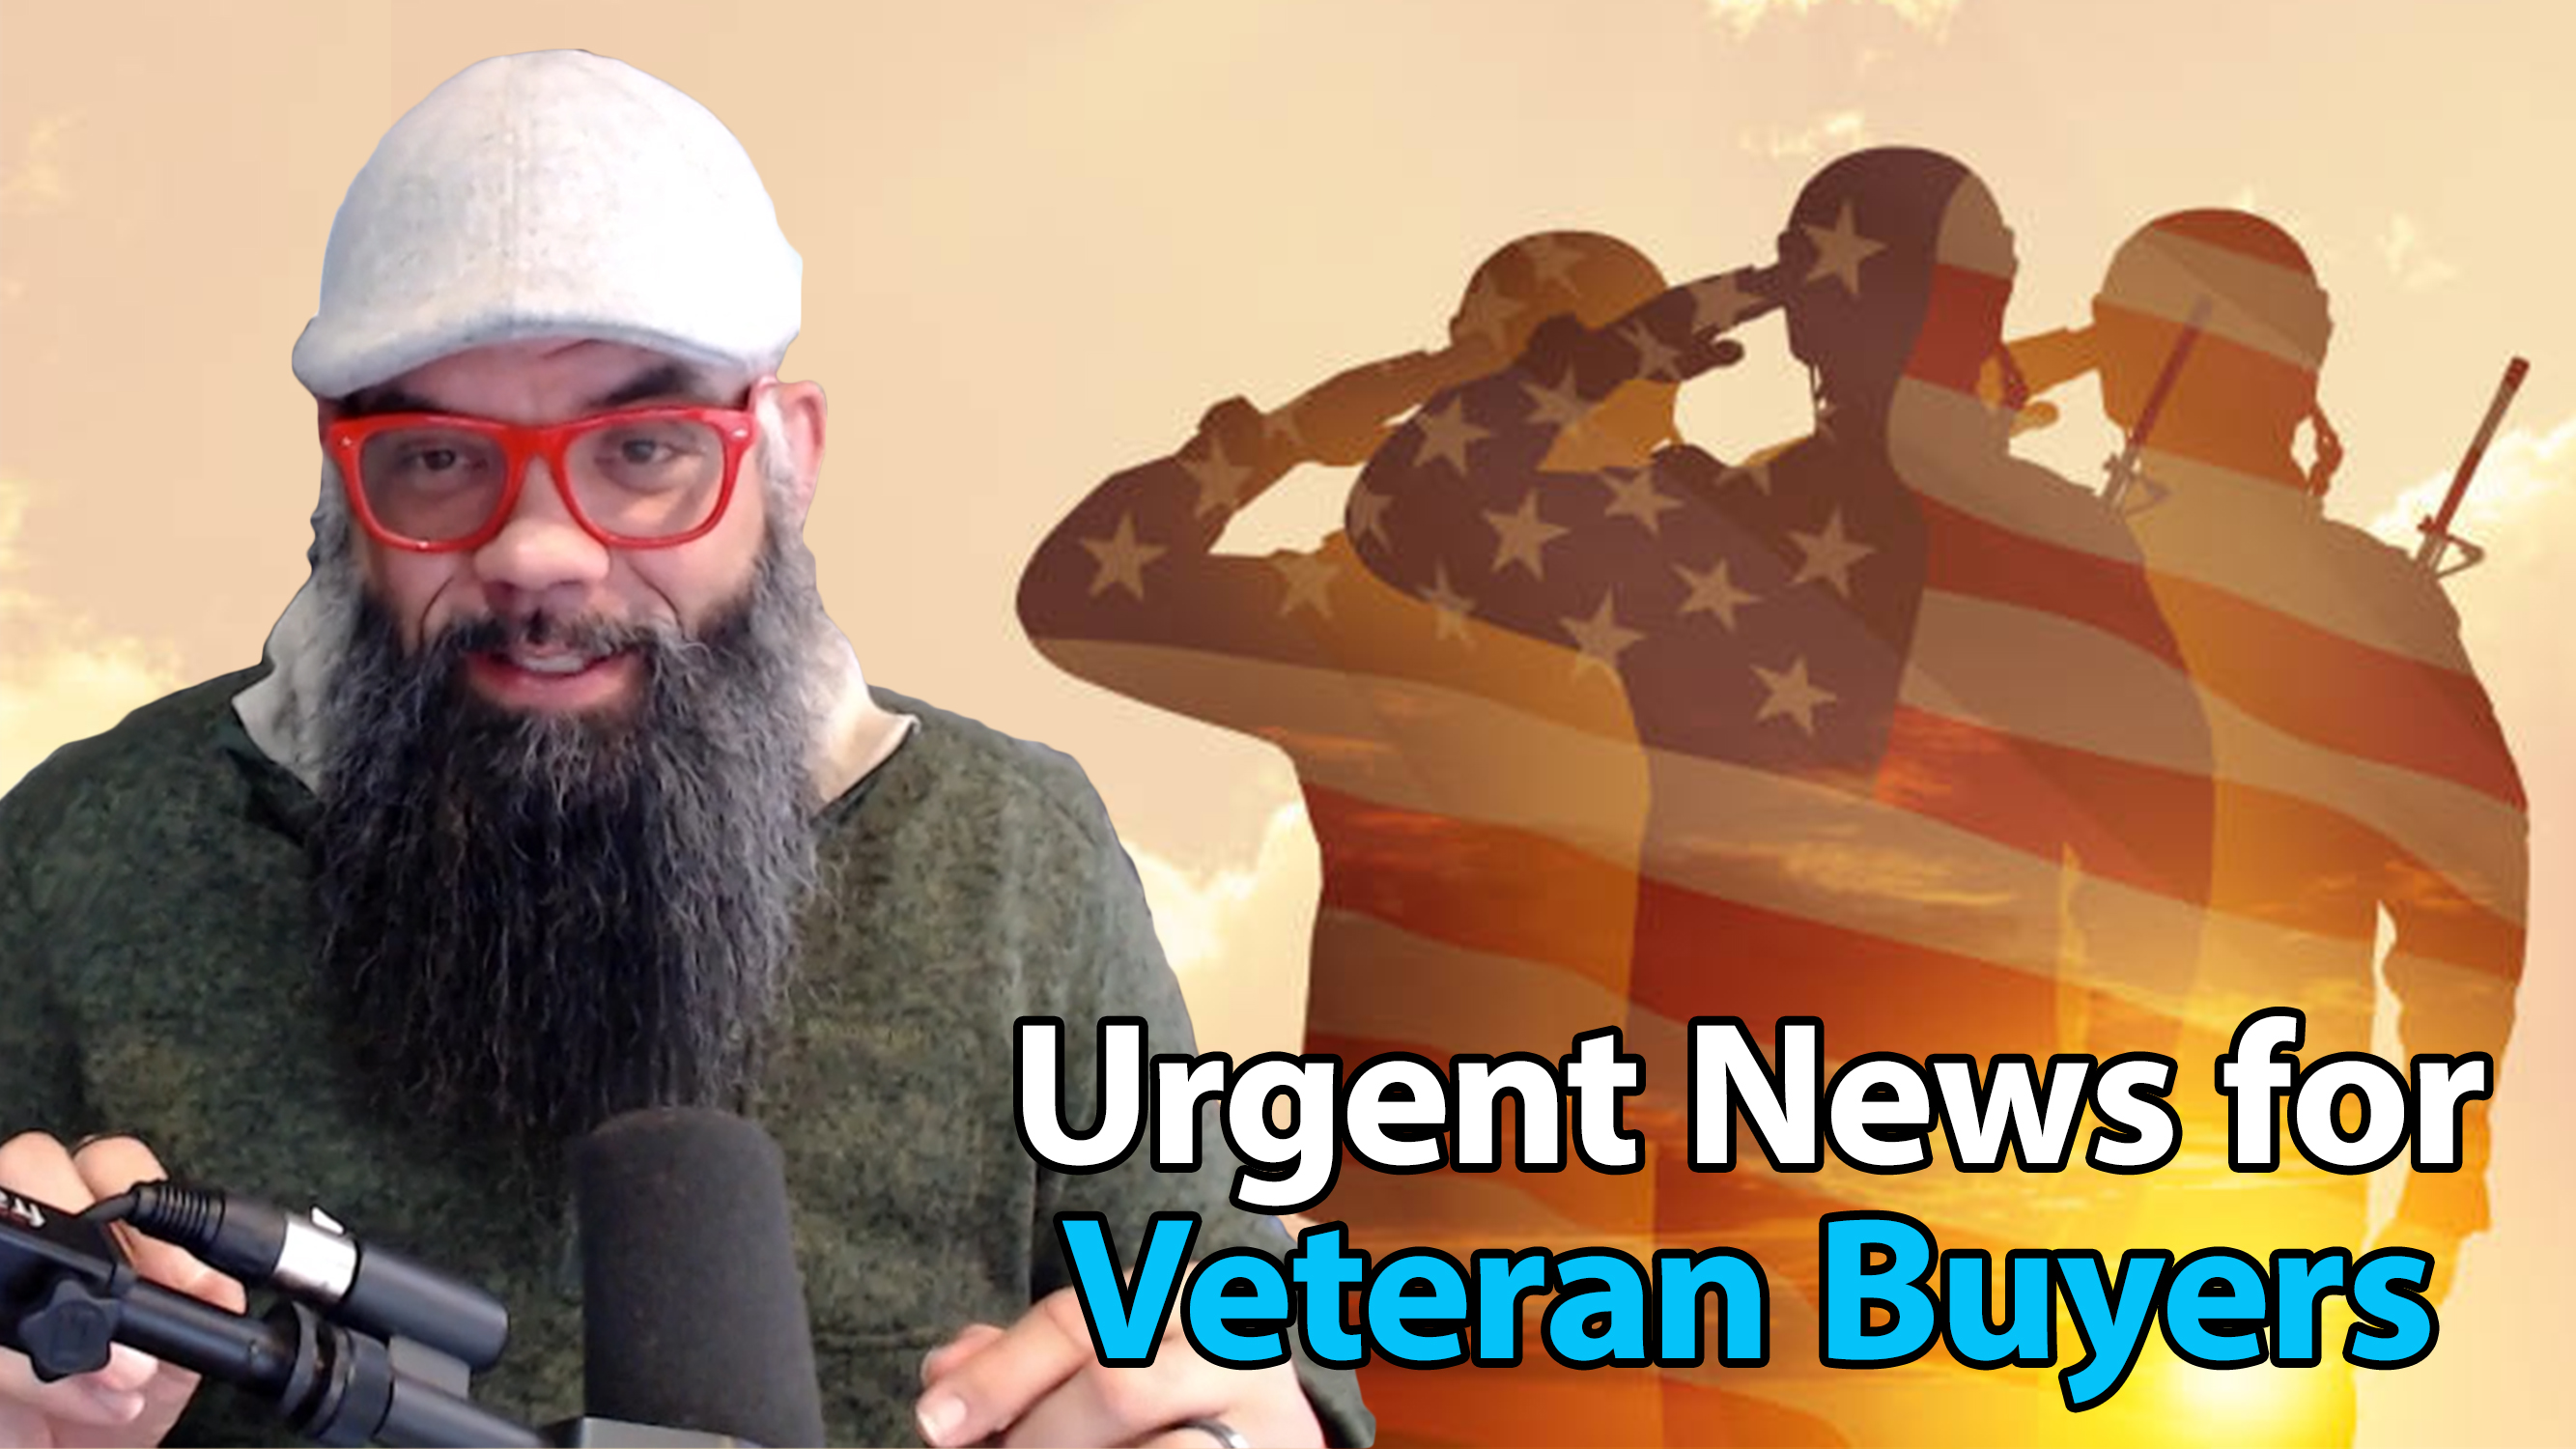 Veteran Buyers: You Need To See This